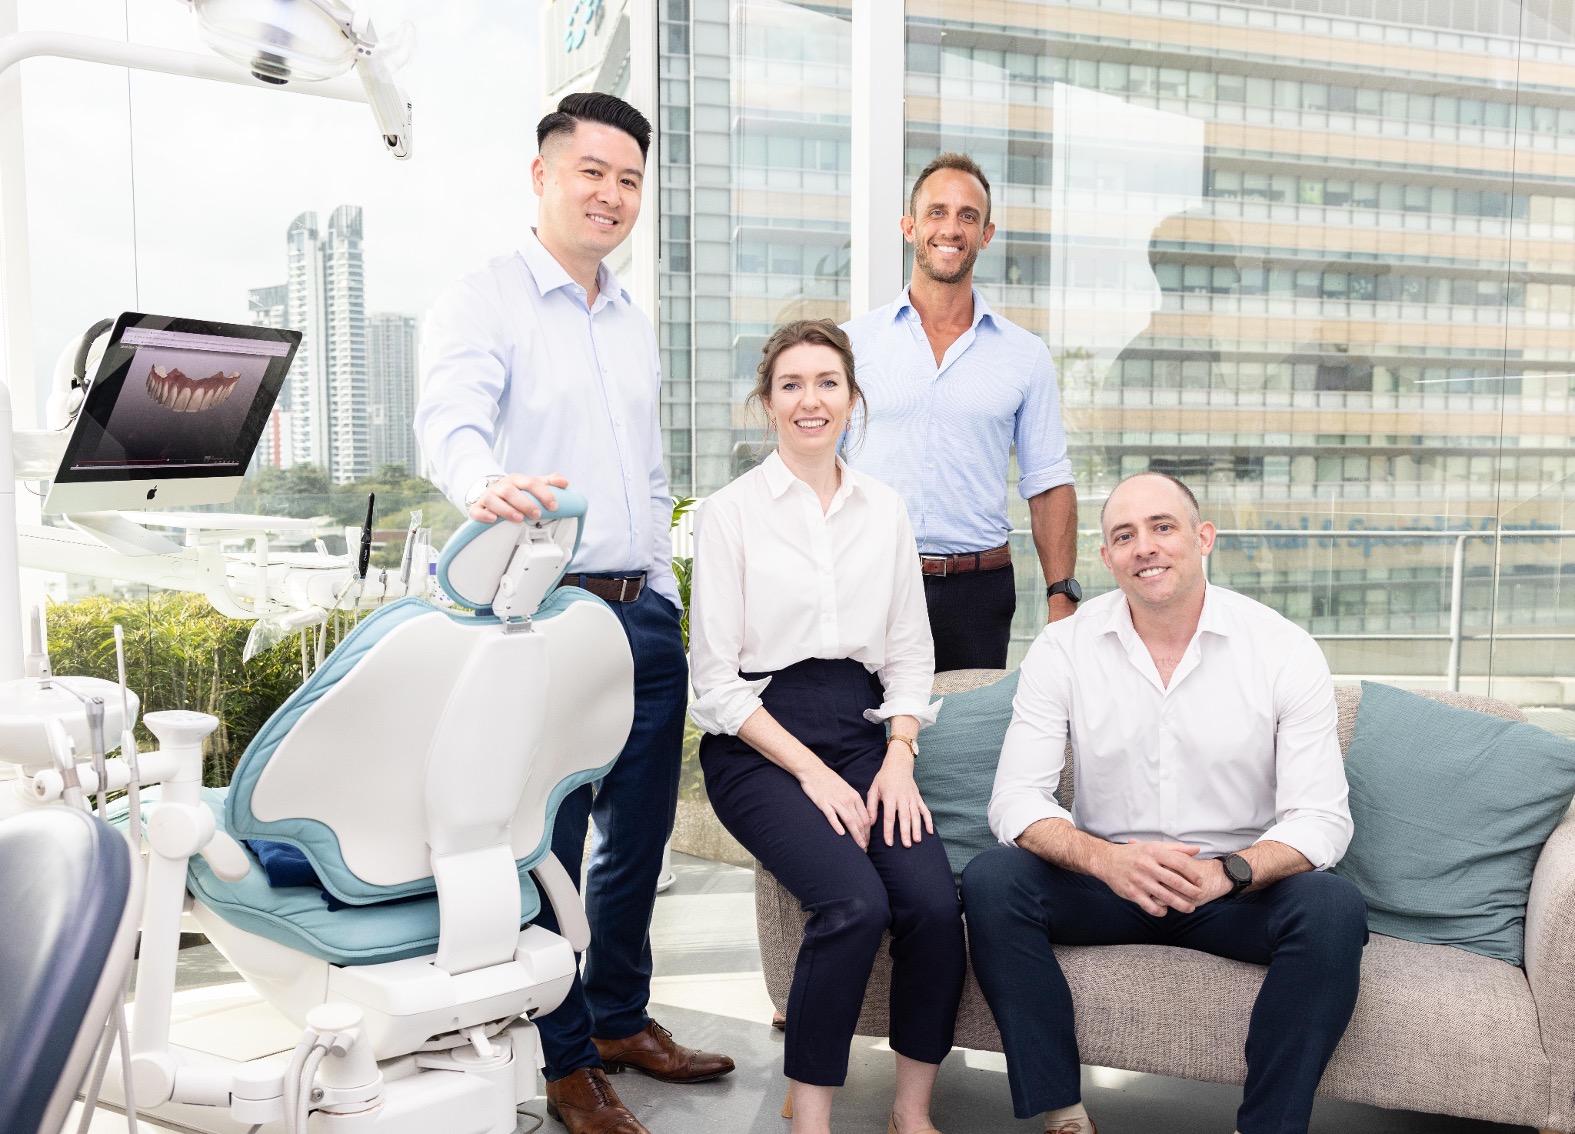 The Expat Dental team in Singapore